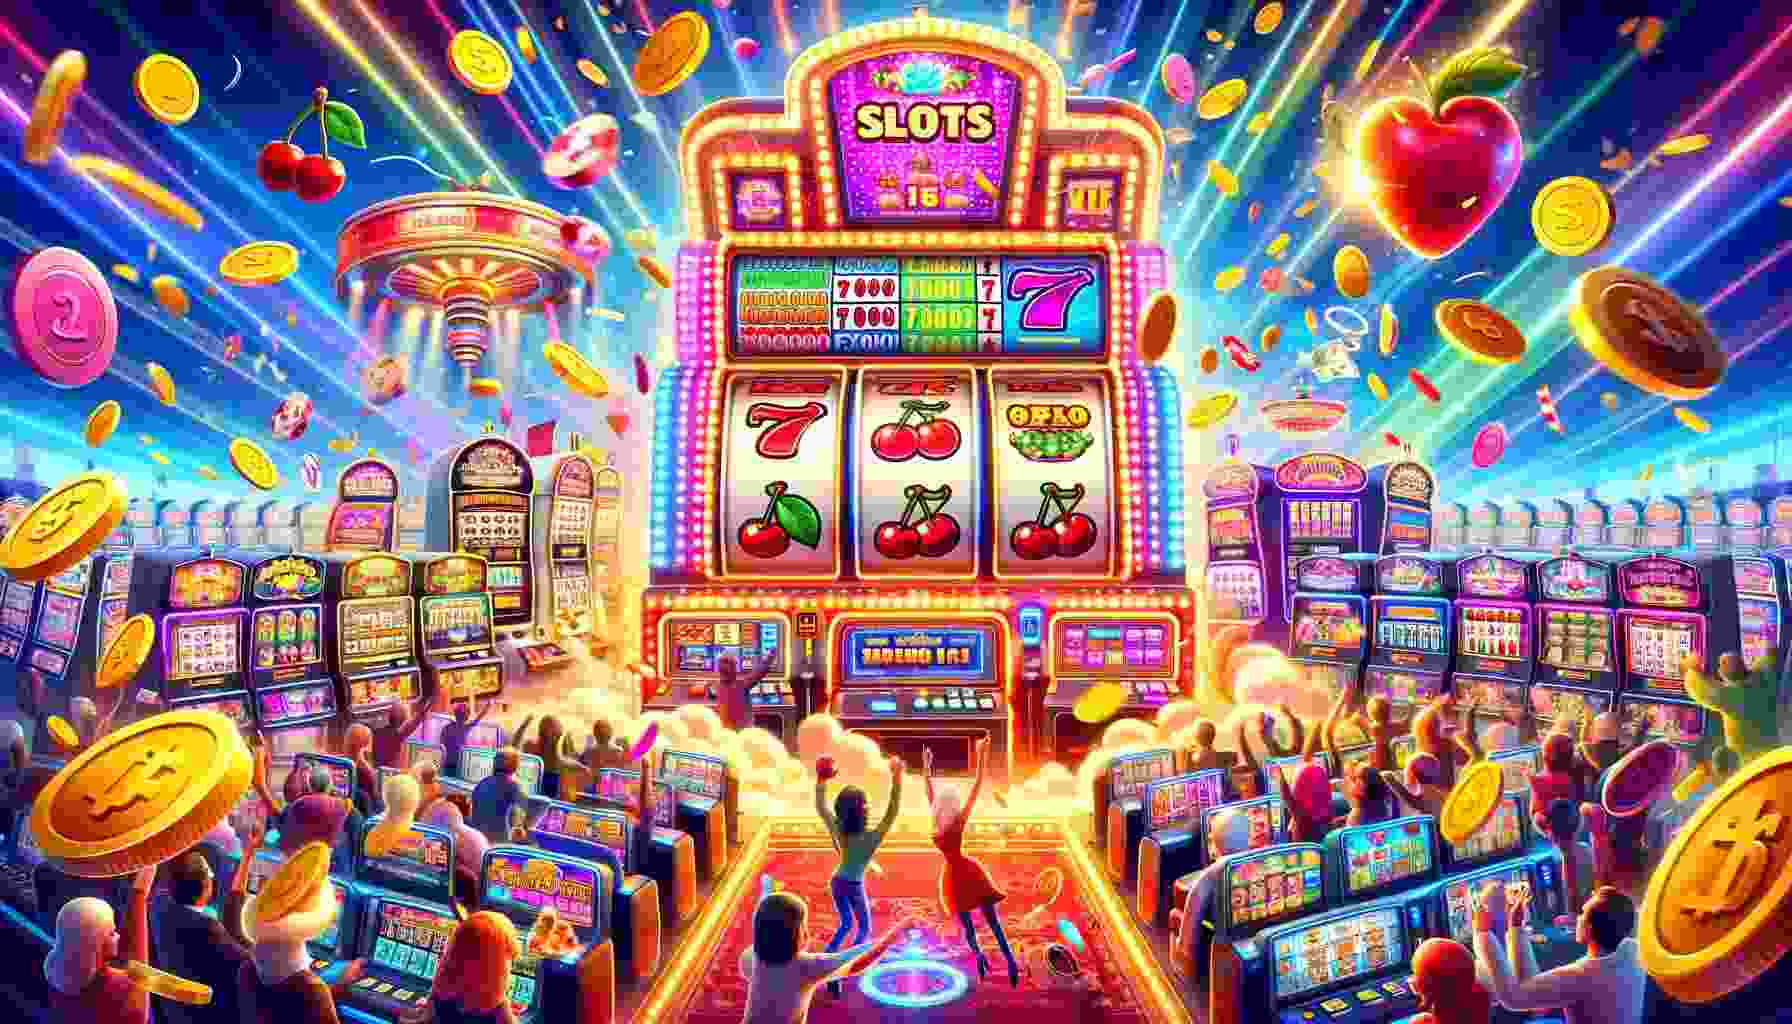 Why Slots Are the Most Popular Type of Online Casino Game